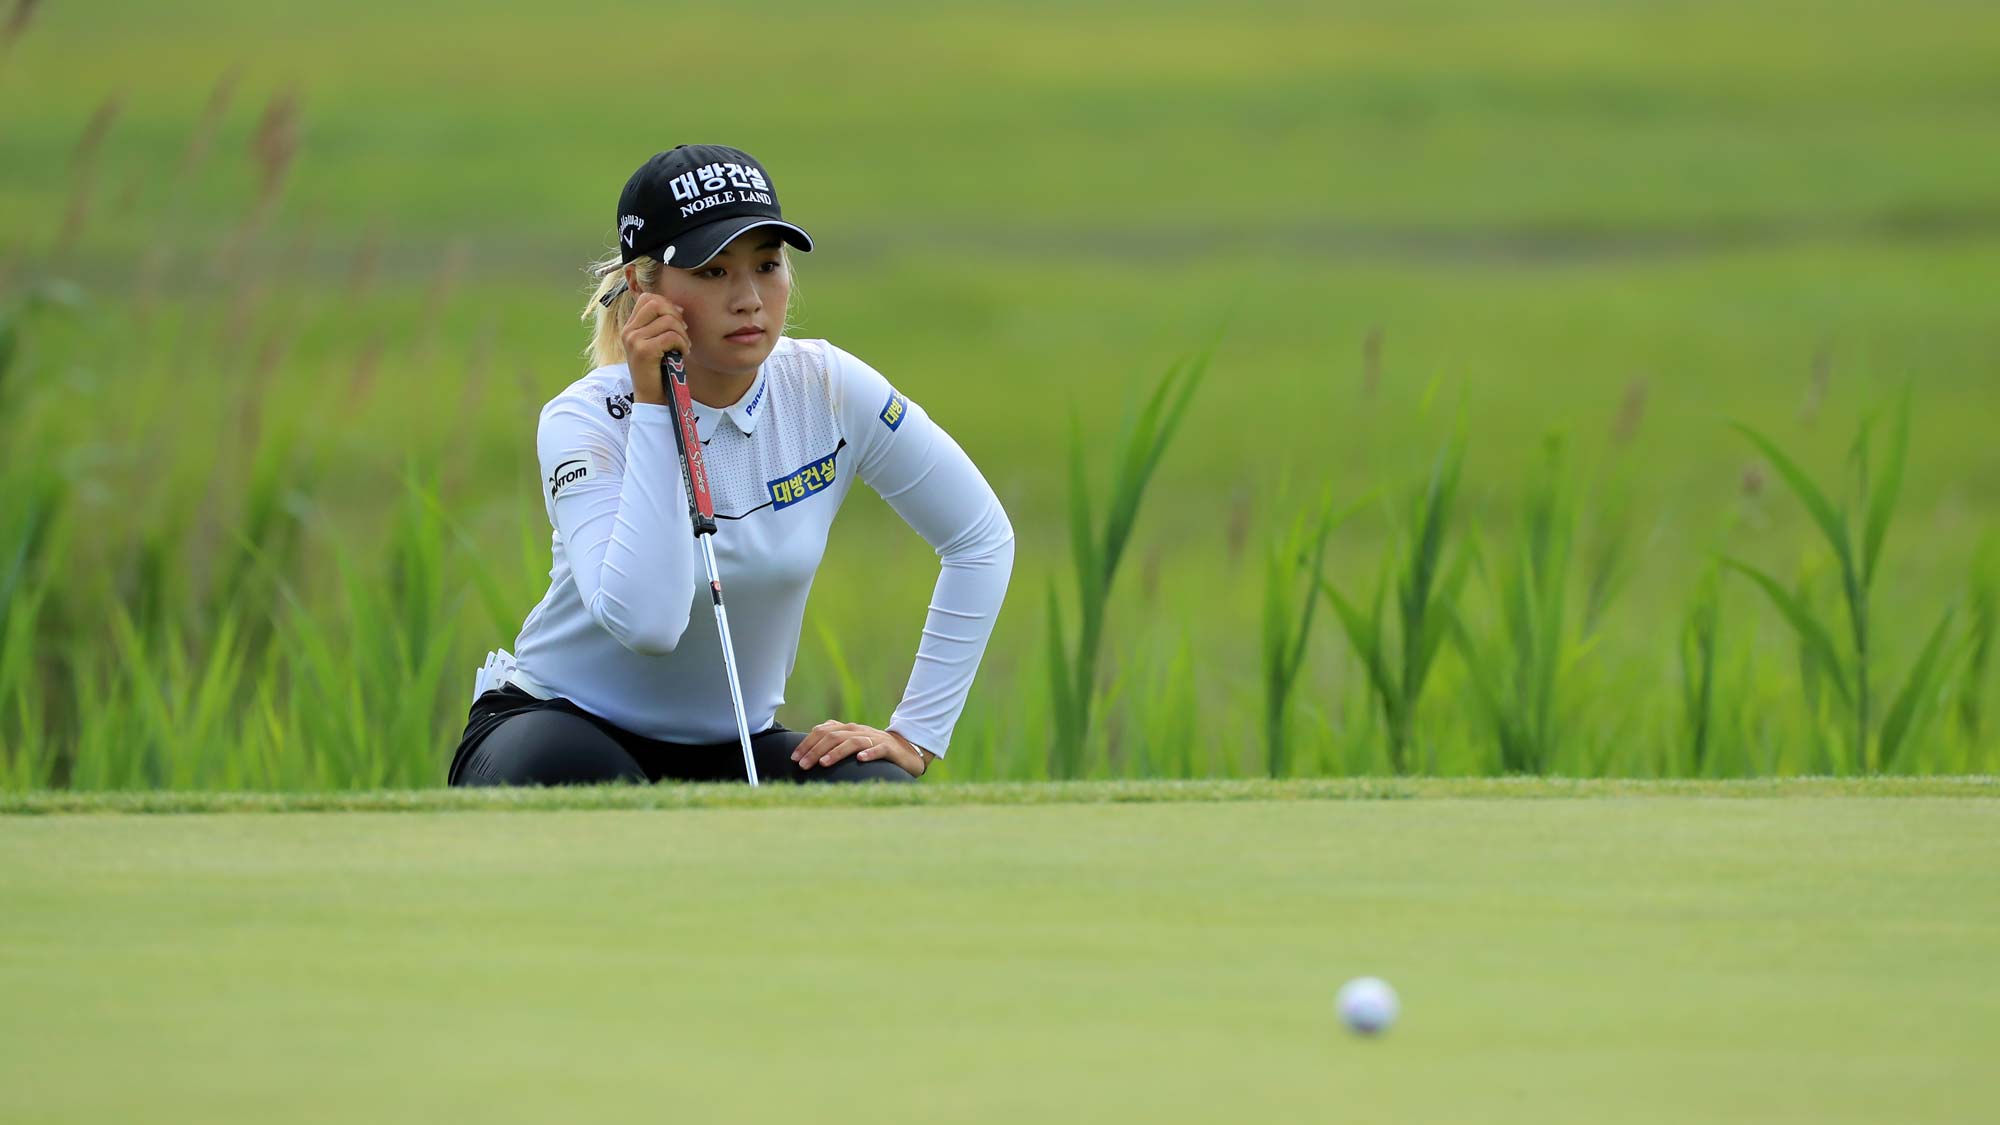 Jeongeun Lee6 of the Republic of Korea lines up her putt on the eighth hole during the second round of the ShopRite LPGA Classic presented by Acer